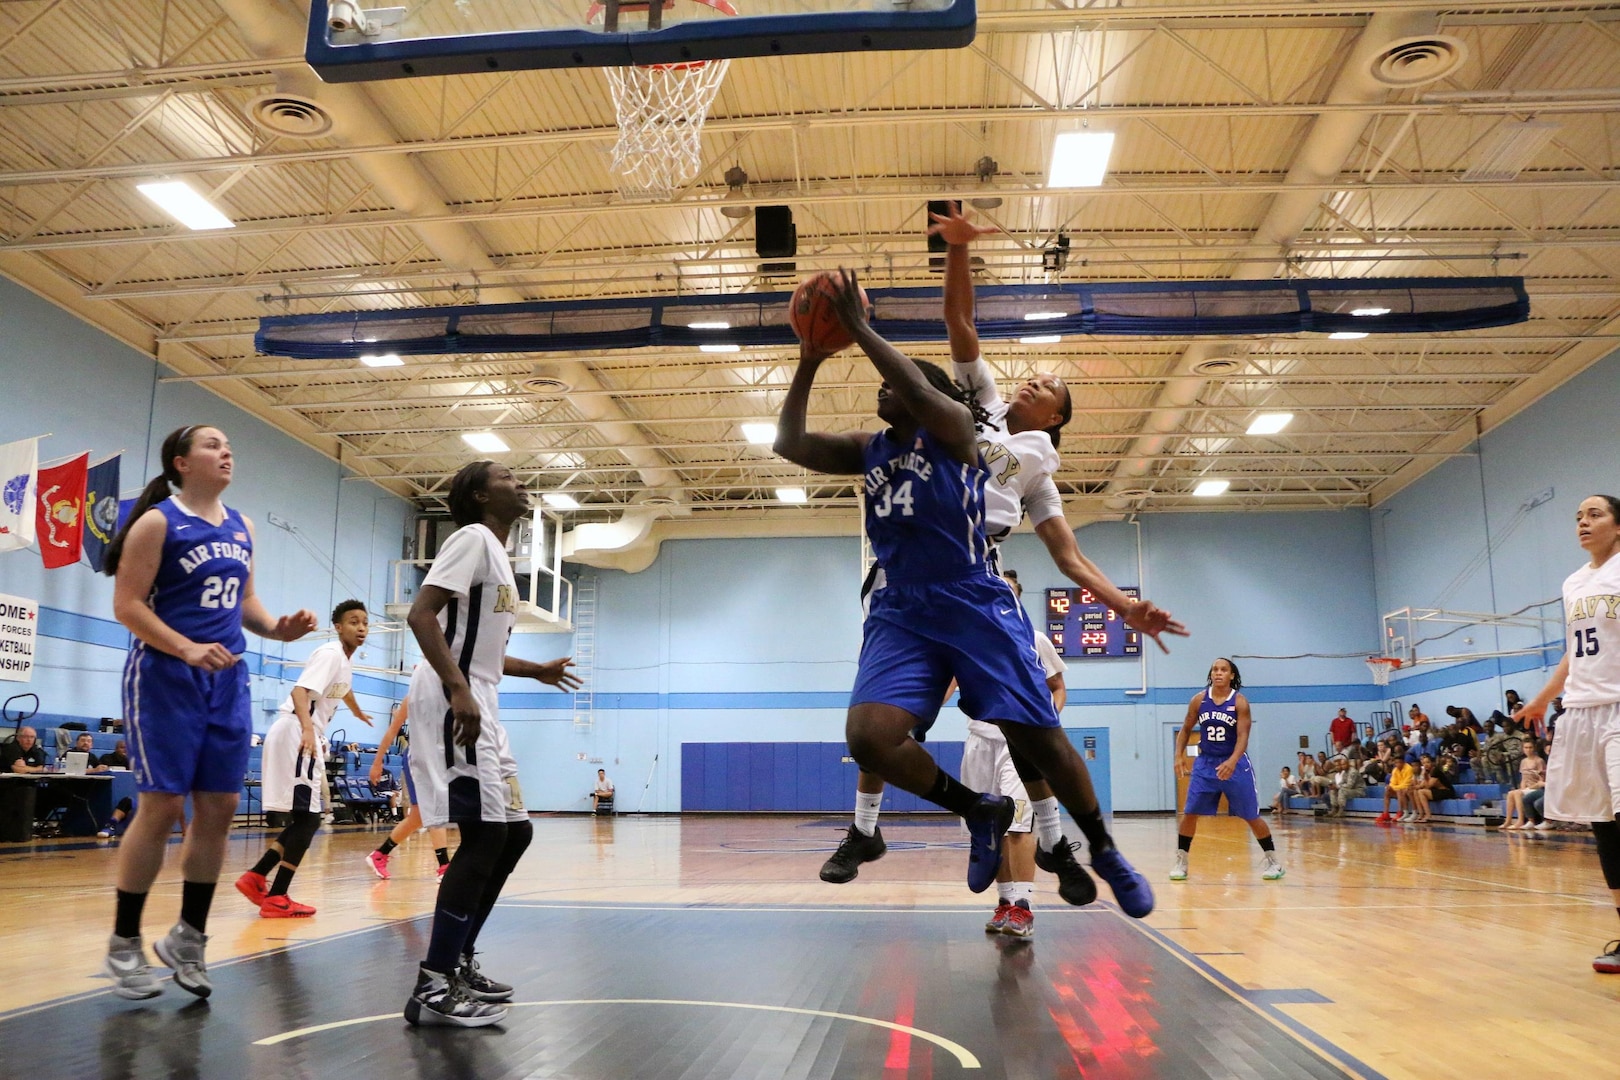 Air Force Staff Sgt. Charmaine Clark (#34) of Robins AFB, Ga. drives the lane against Navy during the 2016 Armed Forces Women's Basketball Championship at Joint Base San Antonio-Lackland AFB, Texas on 2 July.  Air Force would win the contest 64-61.